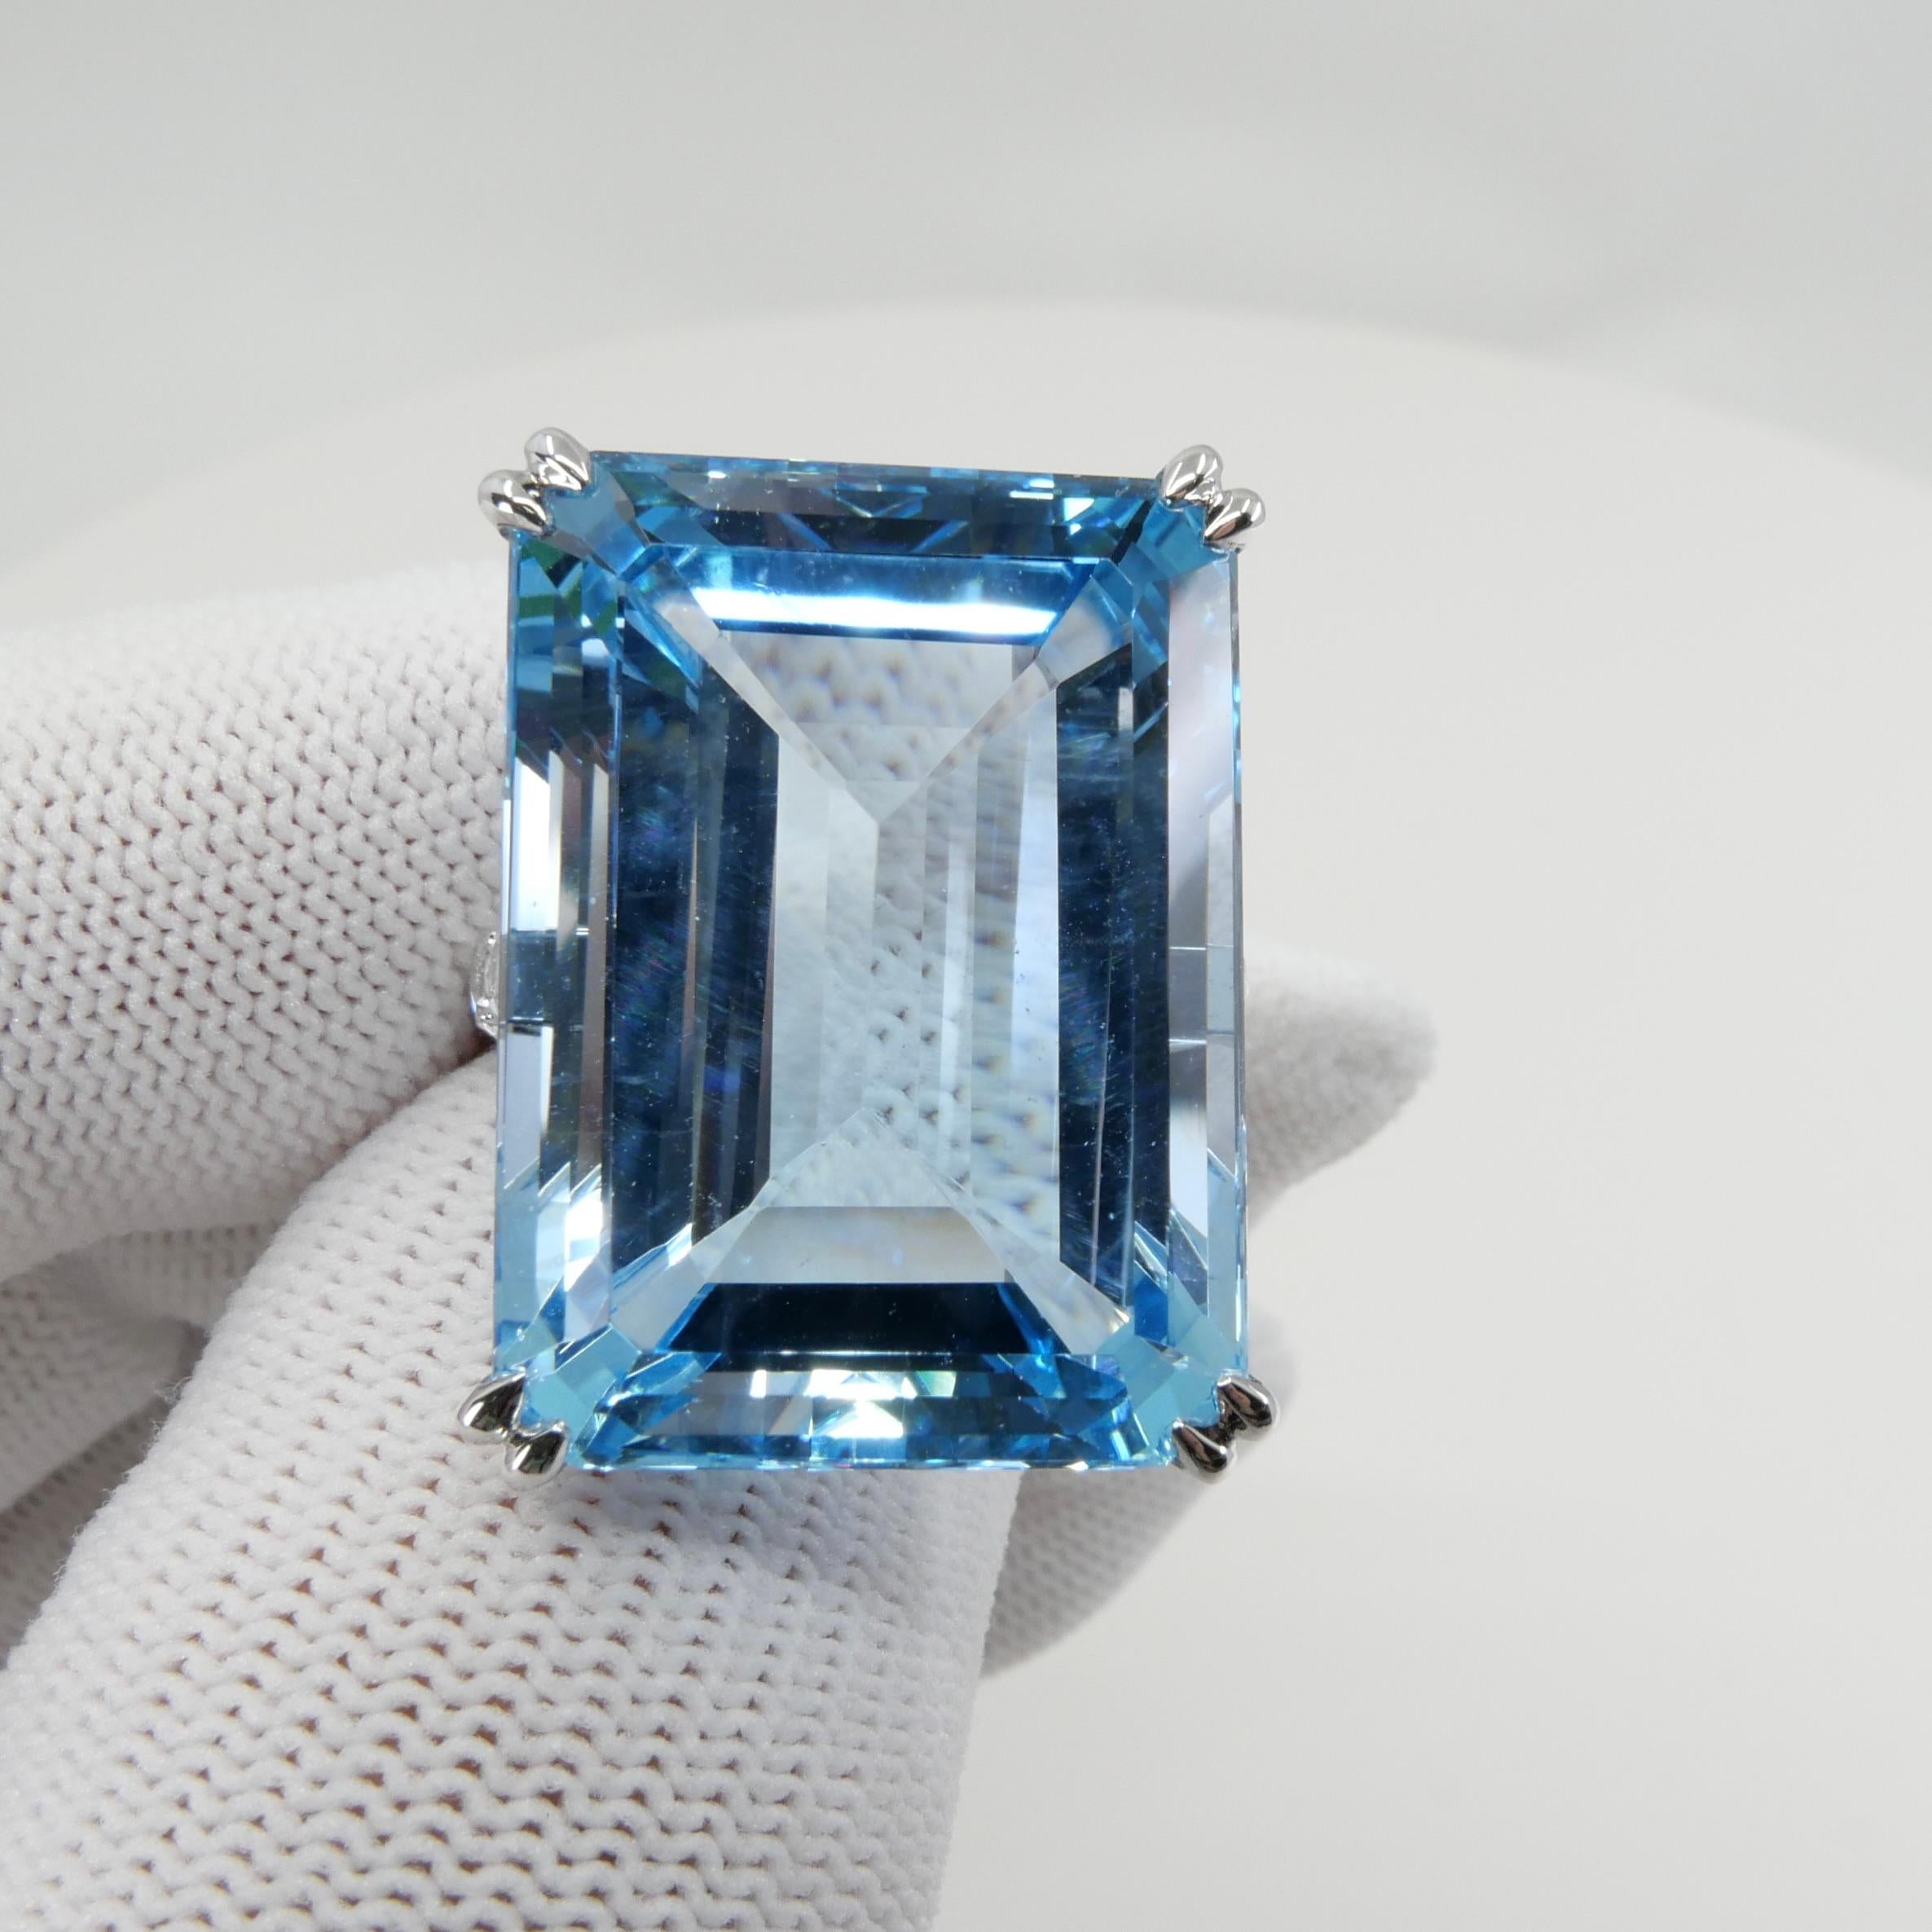 62 Cts Step Cut Blue Topaz & Rose Cut Diamond Cocktail Ring, Substantial For Sale 3